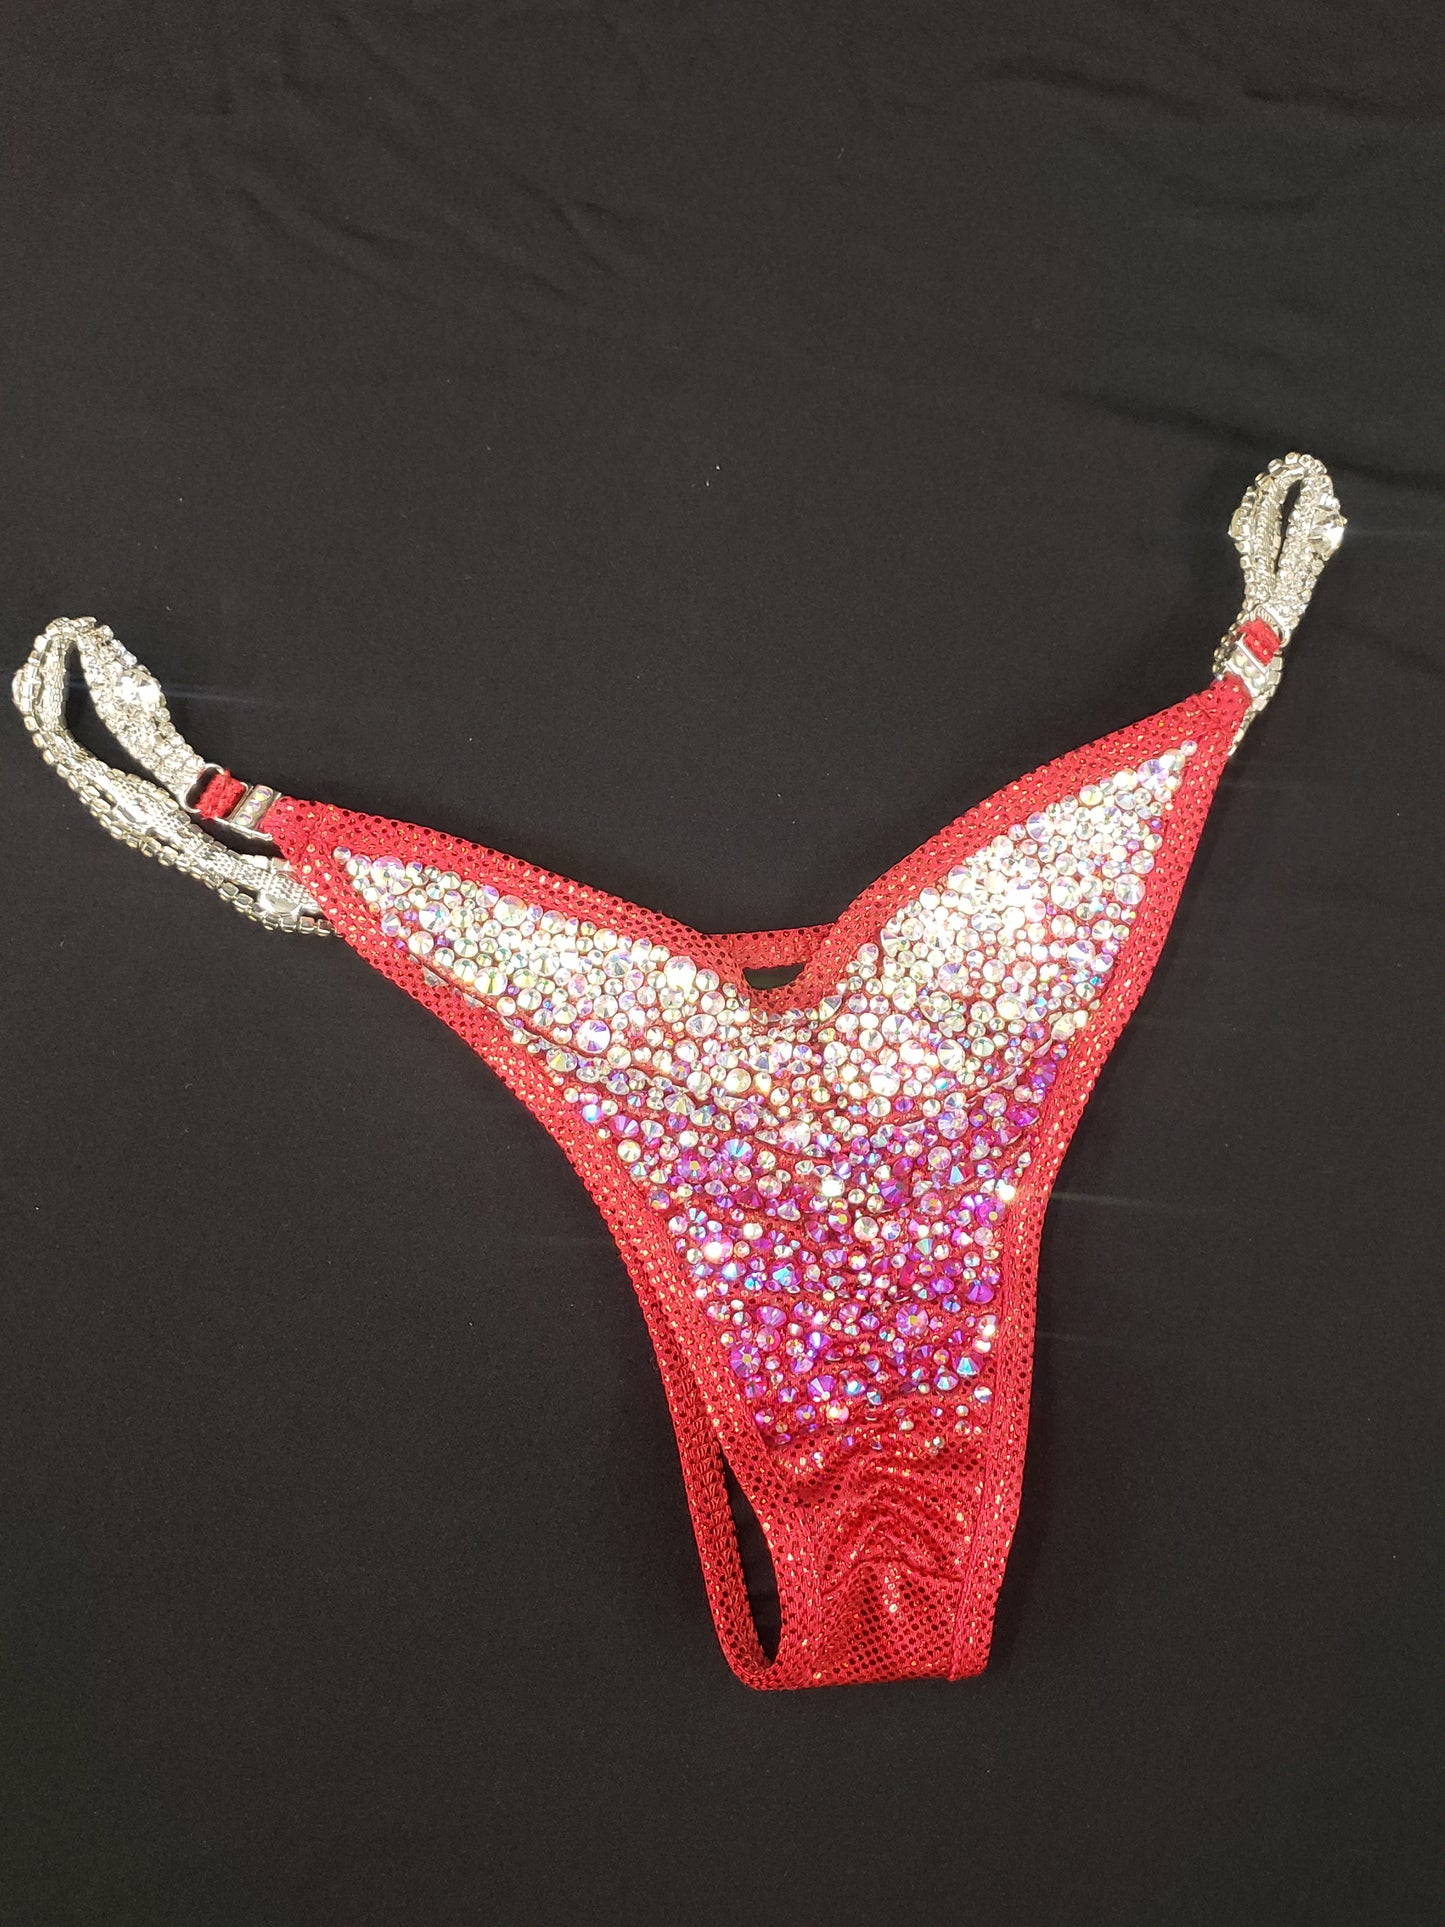 Red bikini with AB rhinestones in a fully encrusted ombre design